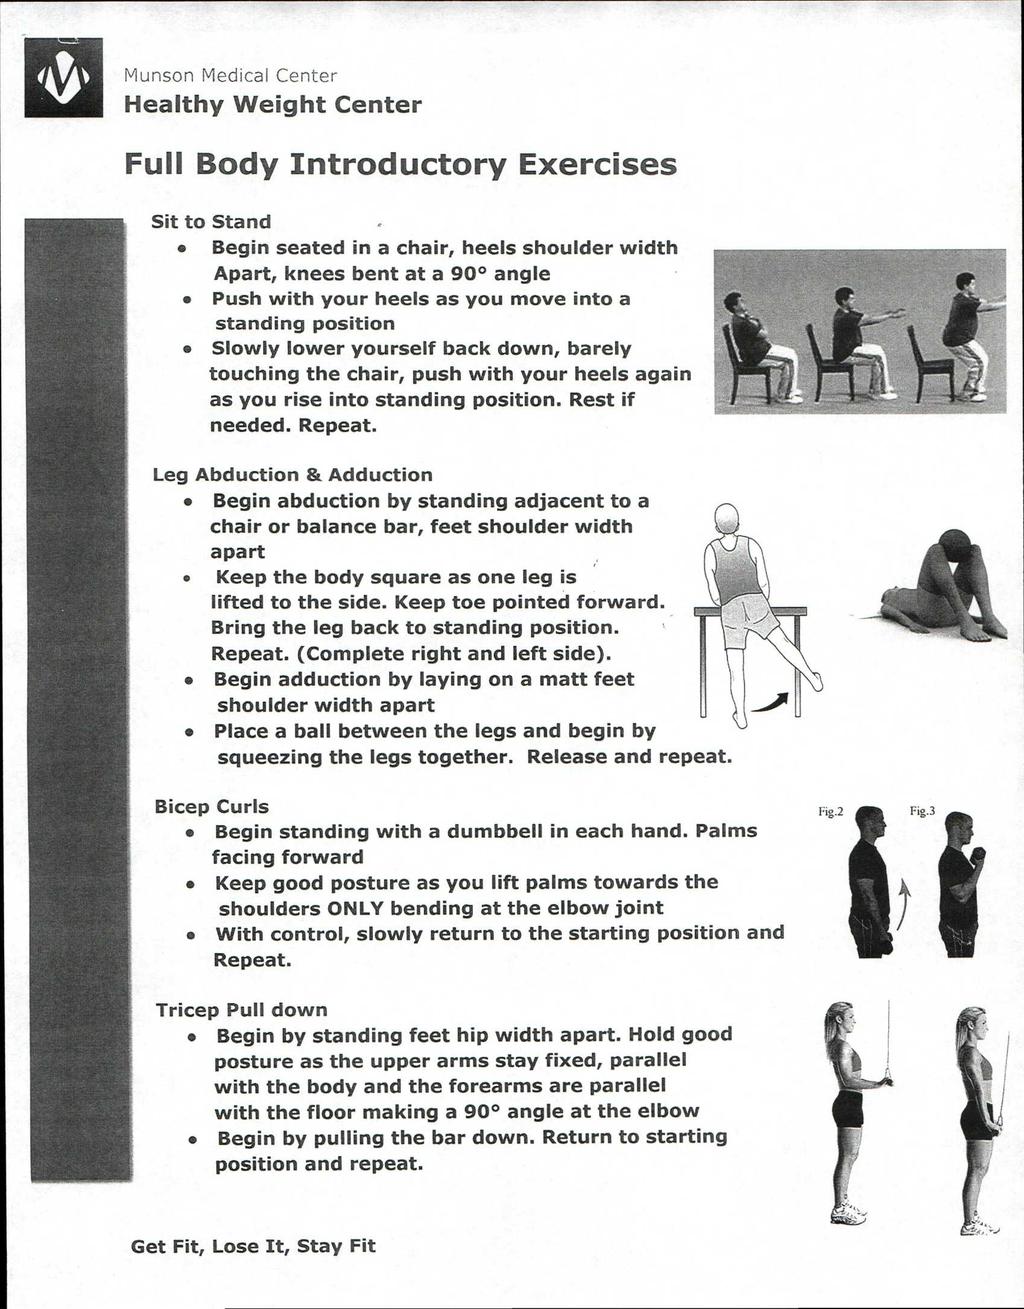 Full Body Introductory Exercises Sit to Stand Begin seated in a chair, heels shoulder width Apart, knees bent at a 90 angle Push with your heels as you move into a standing position Slowly lower